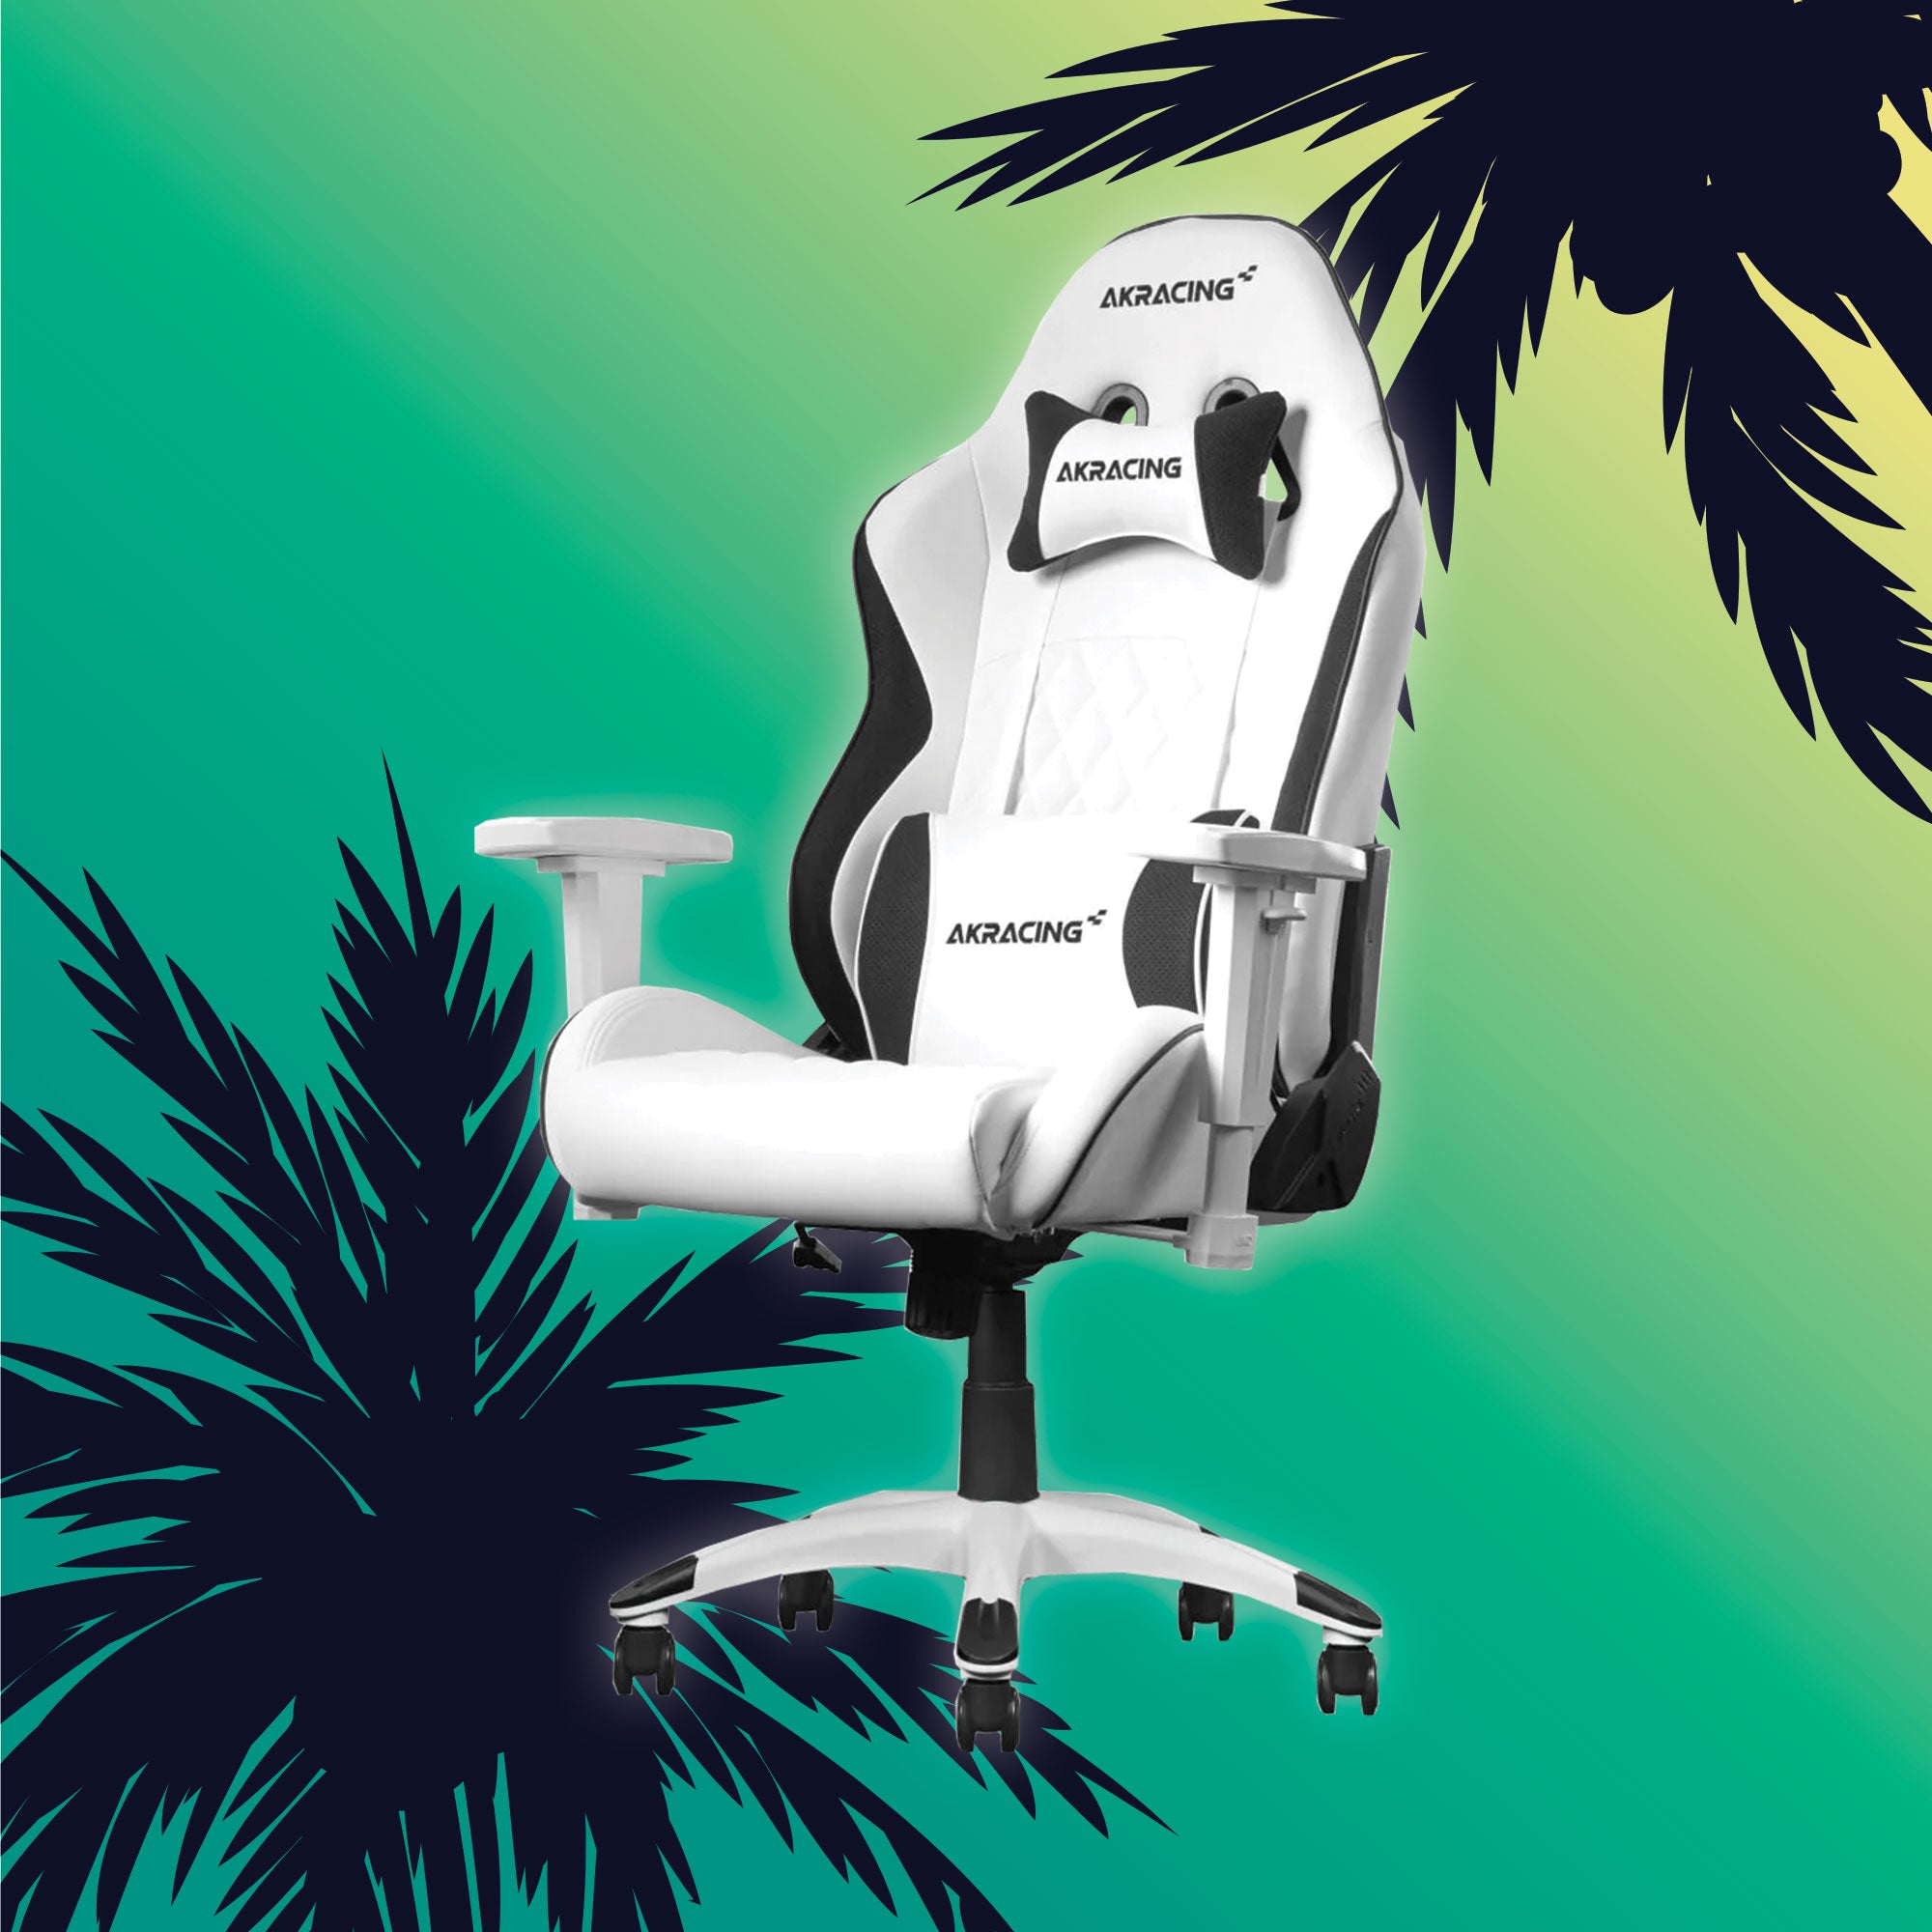 Gaming Chair Deals